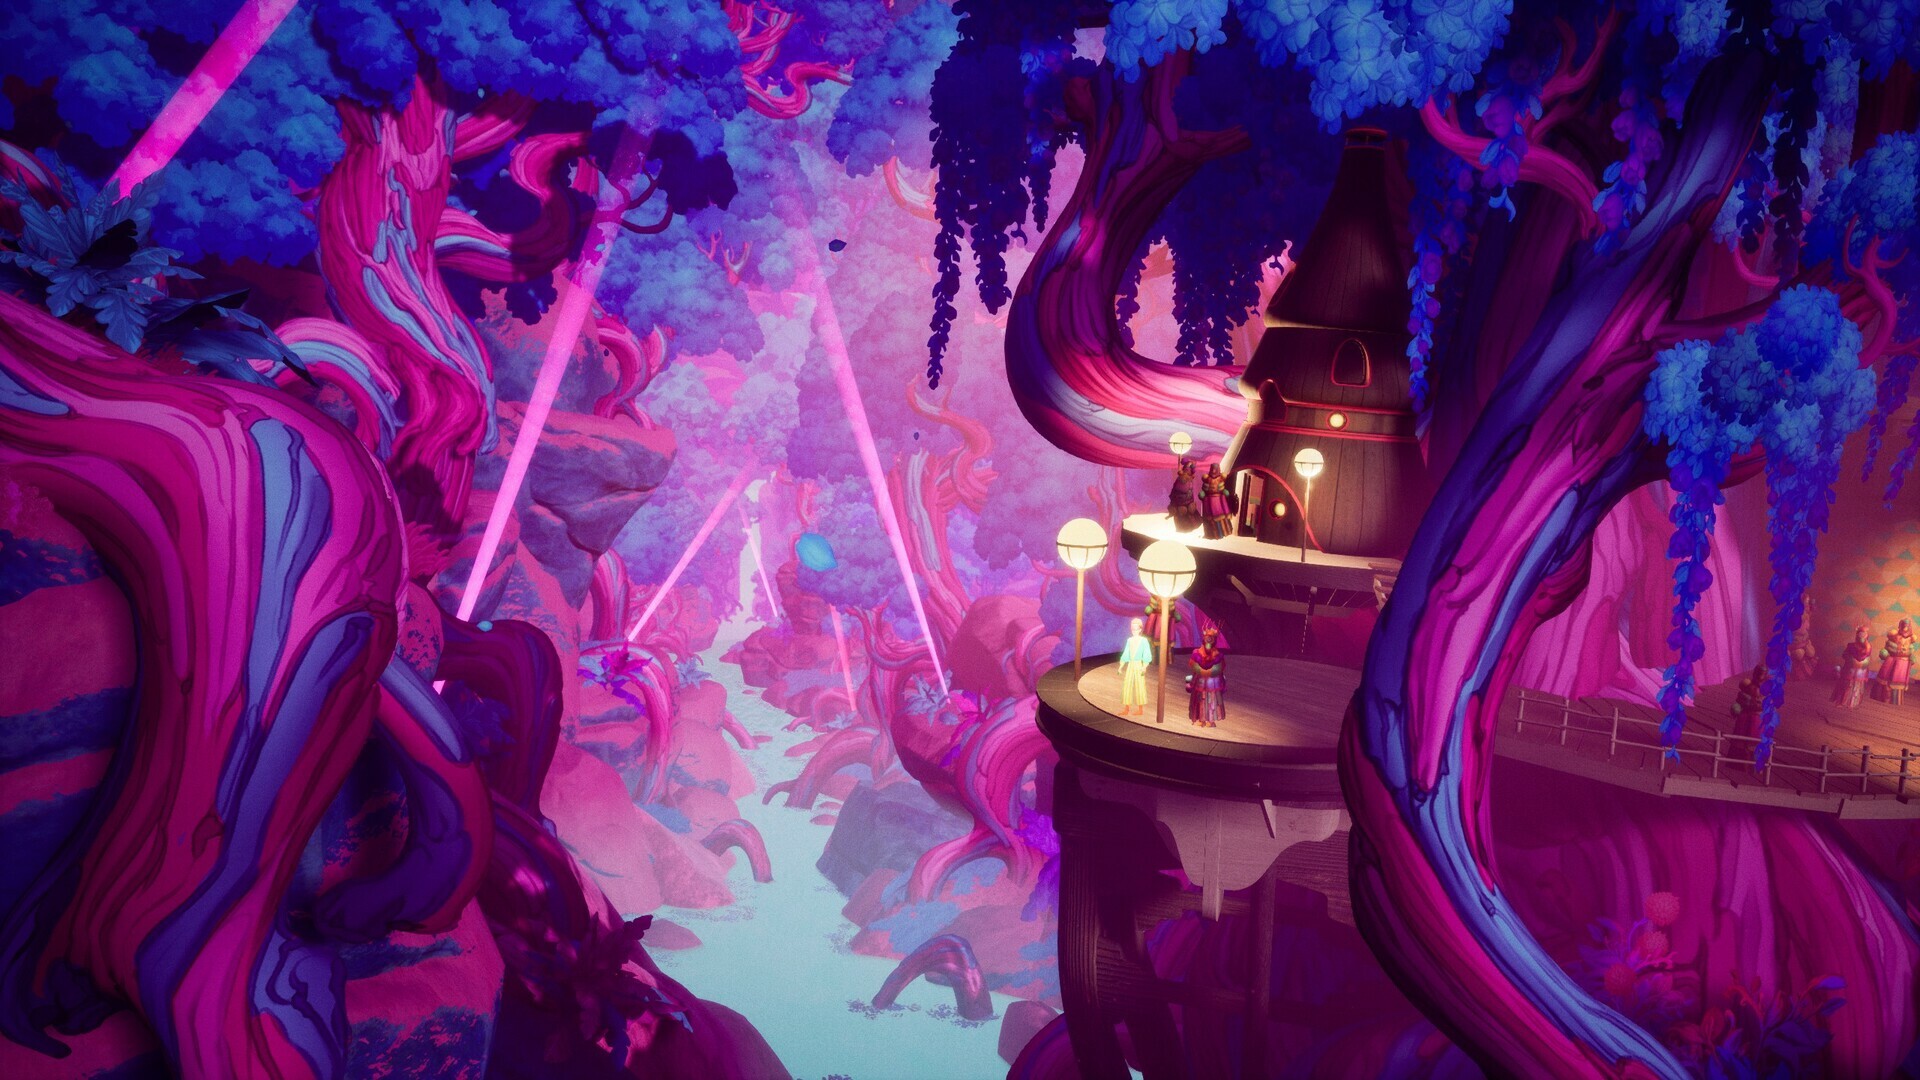 The Artful Escape: Environment art, Neon, Psychedelic, Beethoven and Dinosaur. 1920x1080 Full HD Wallpaper.